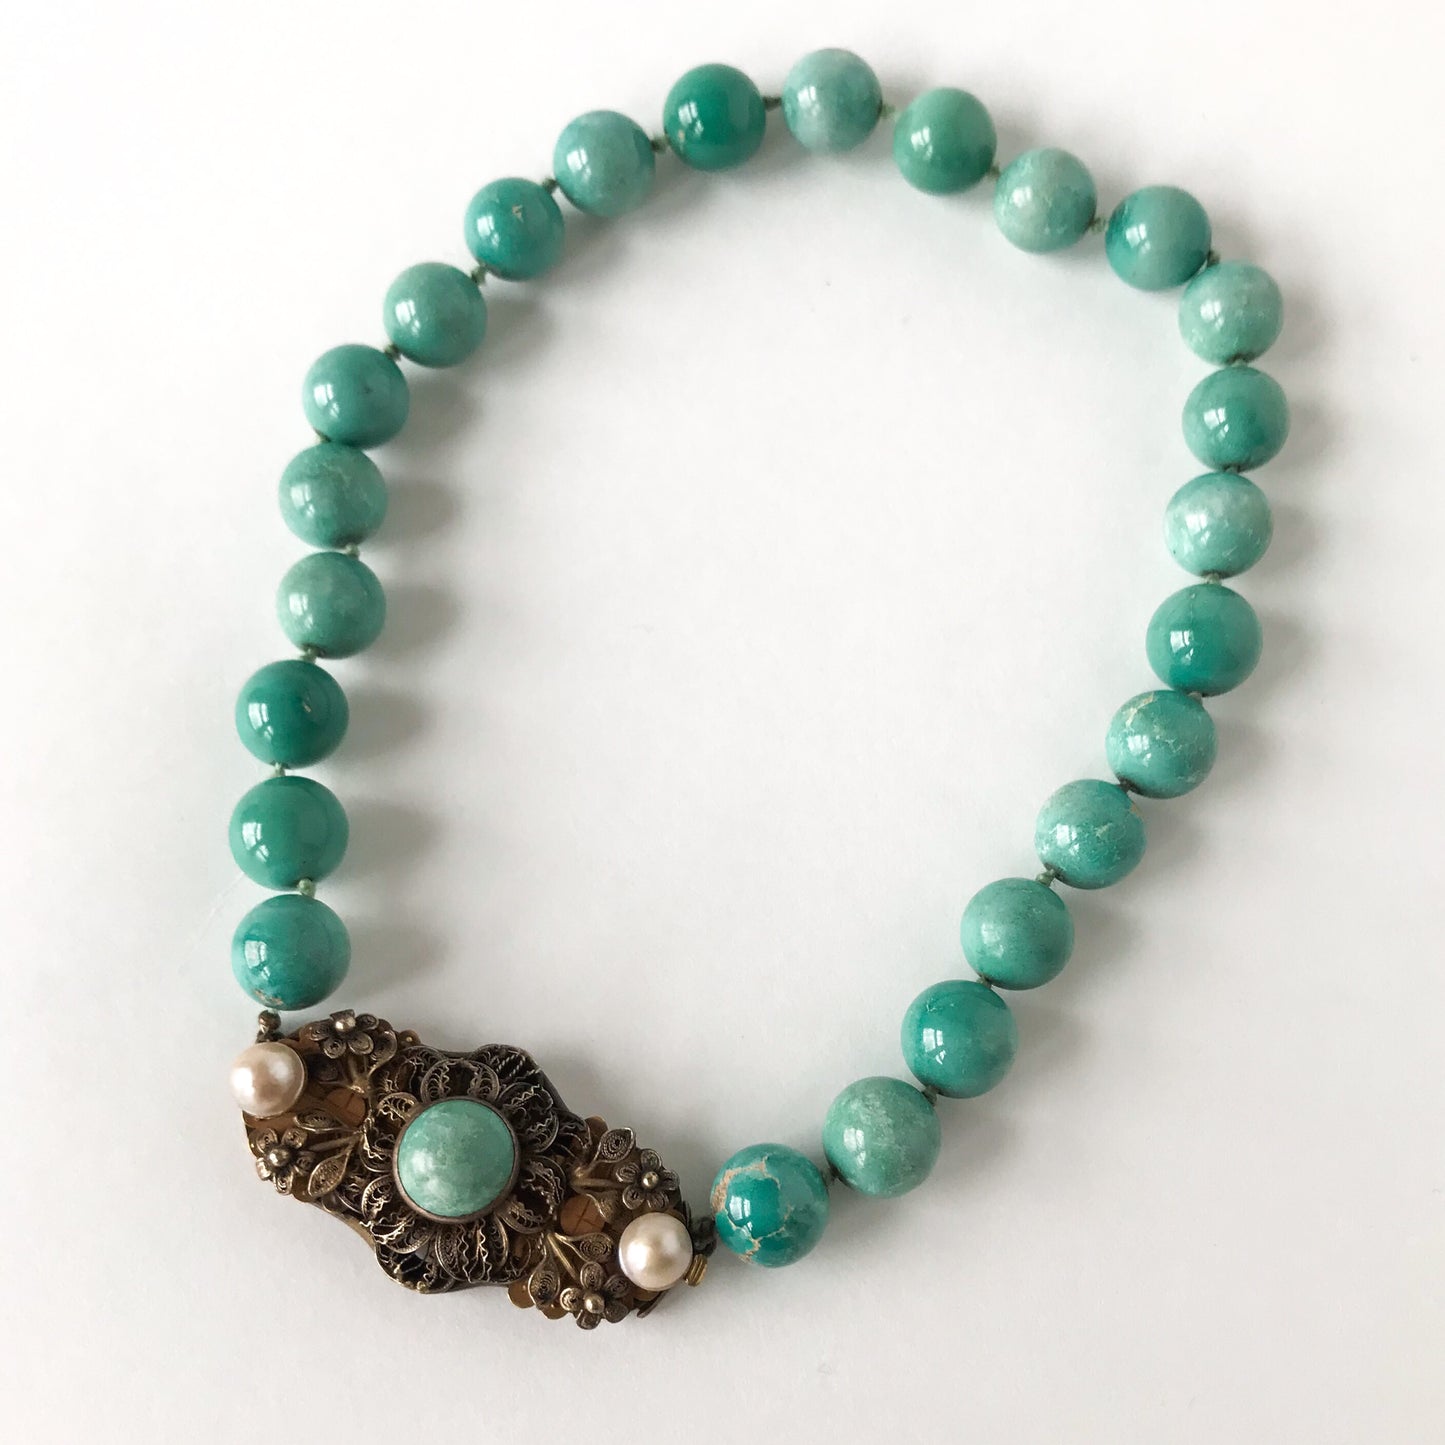 SOLD-Art Deco Turquoise Bead Necklace Gilt Silver c. 1930